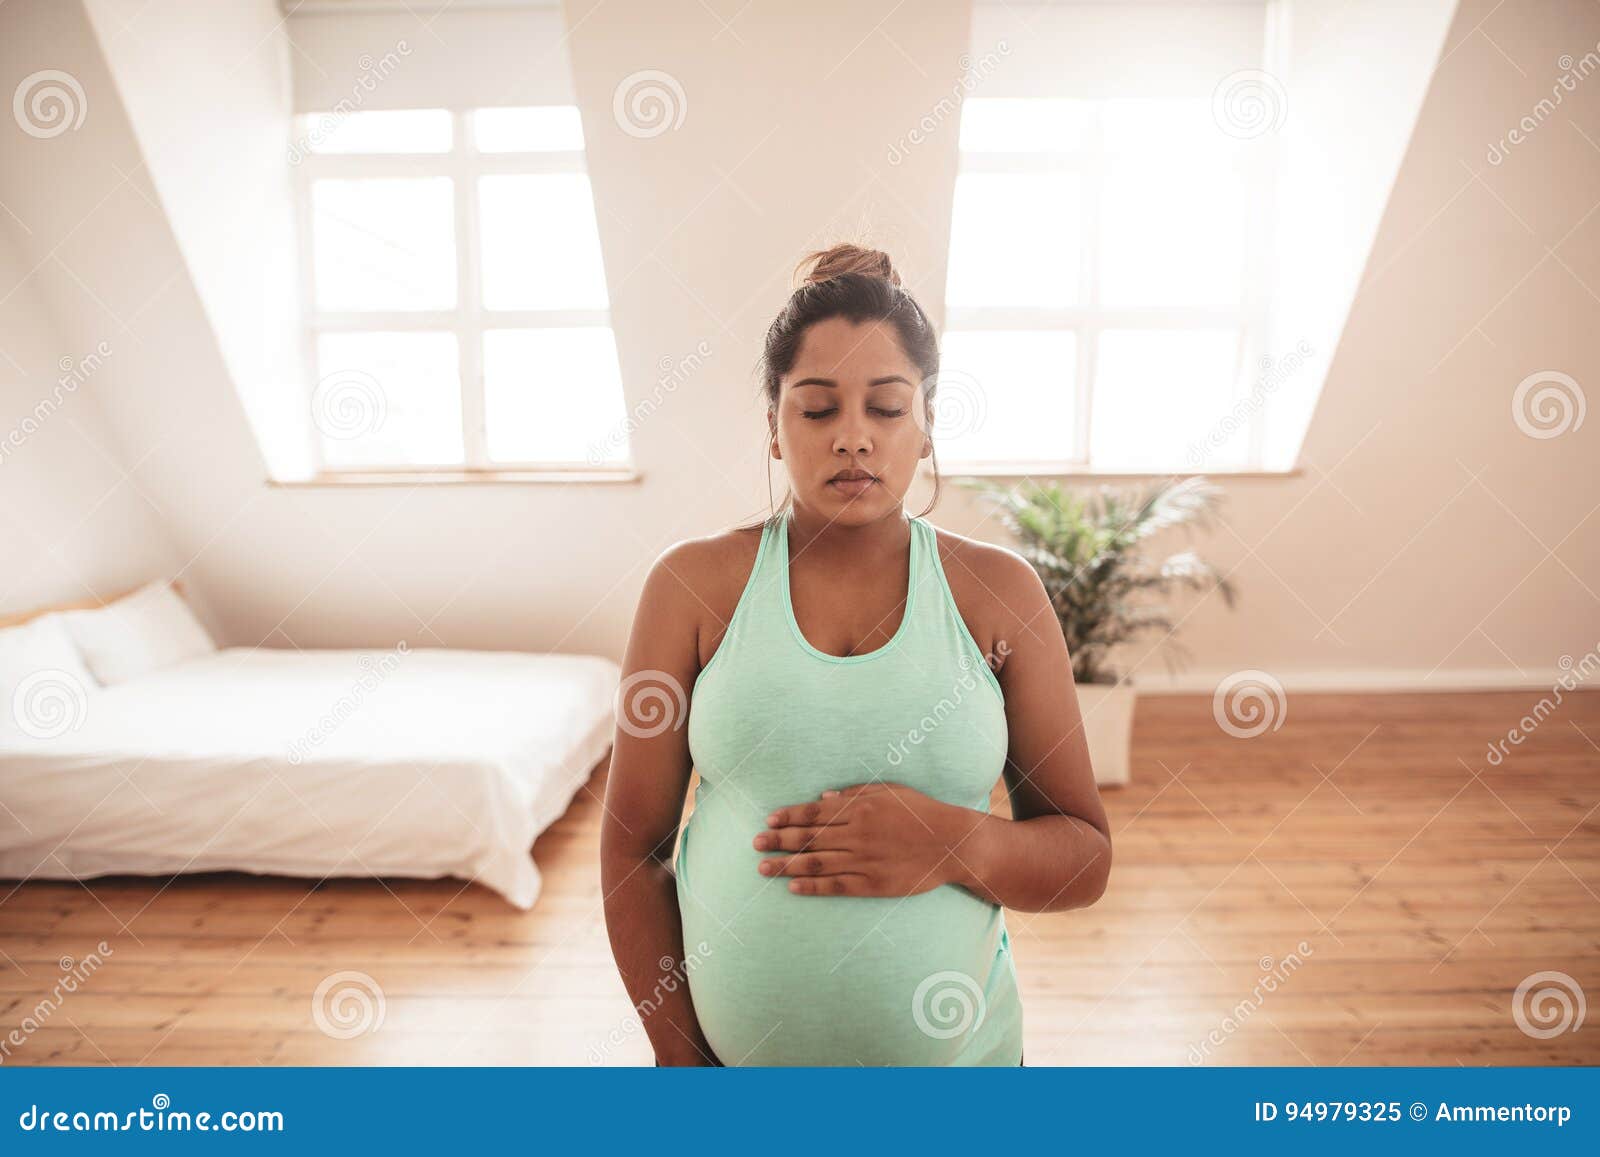 Expectant Mother Meditating At Home Stock Image - Image of ...